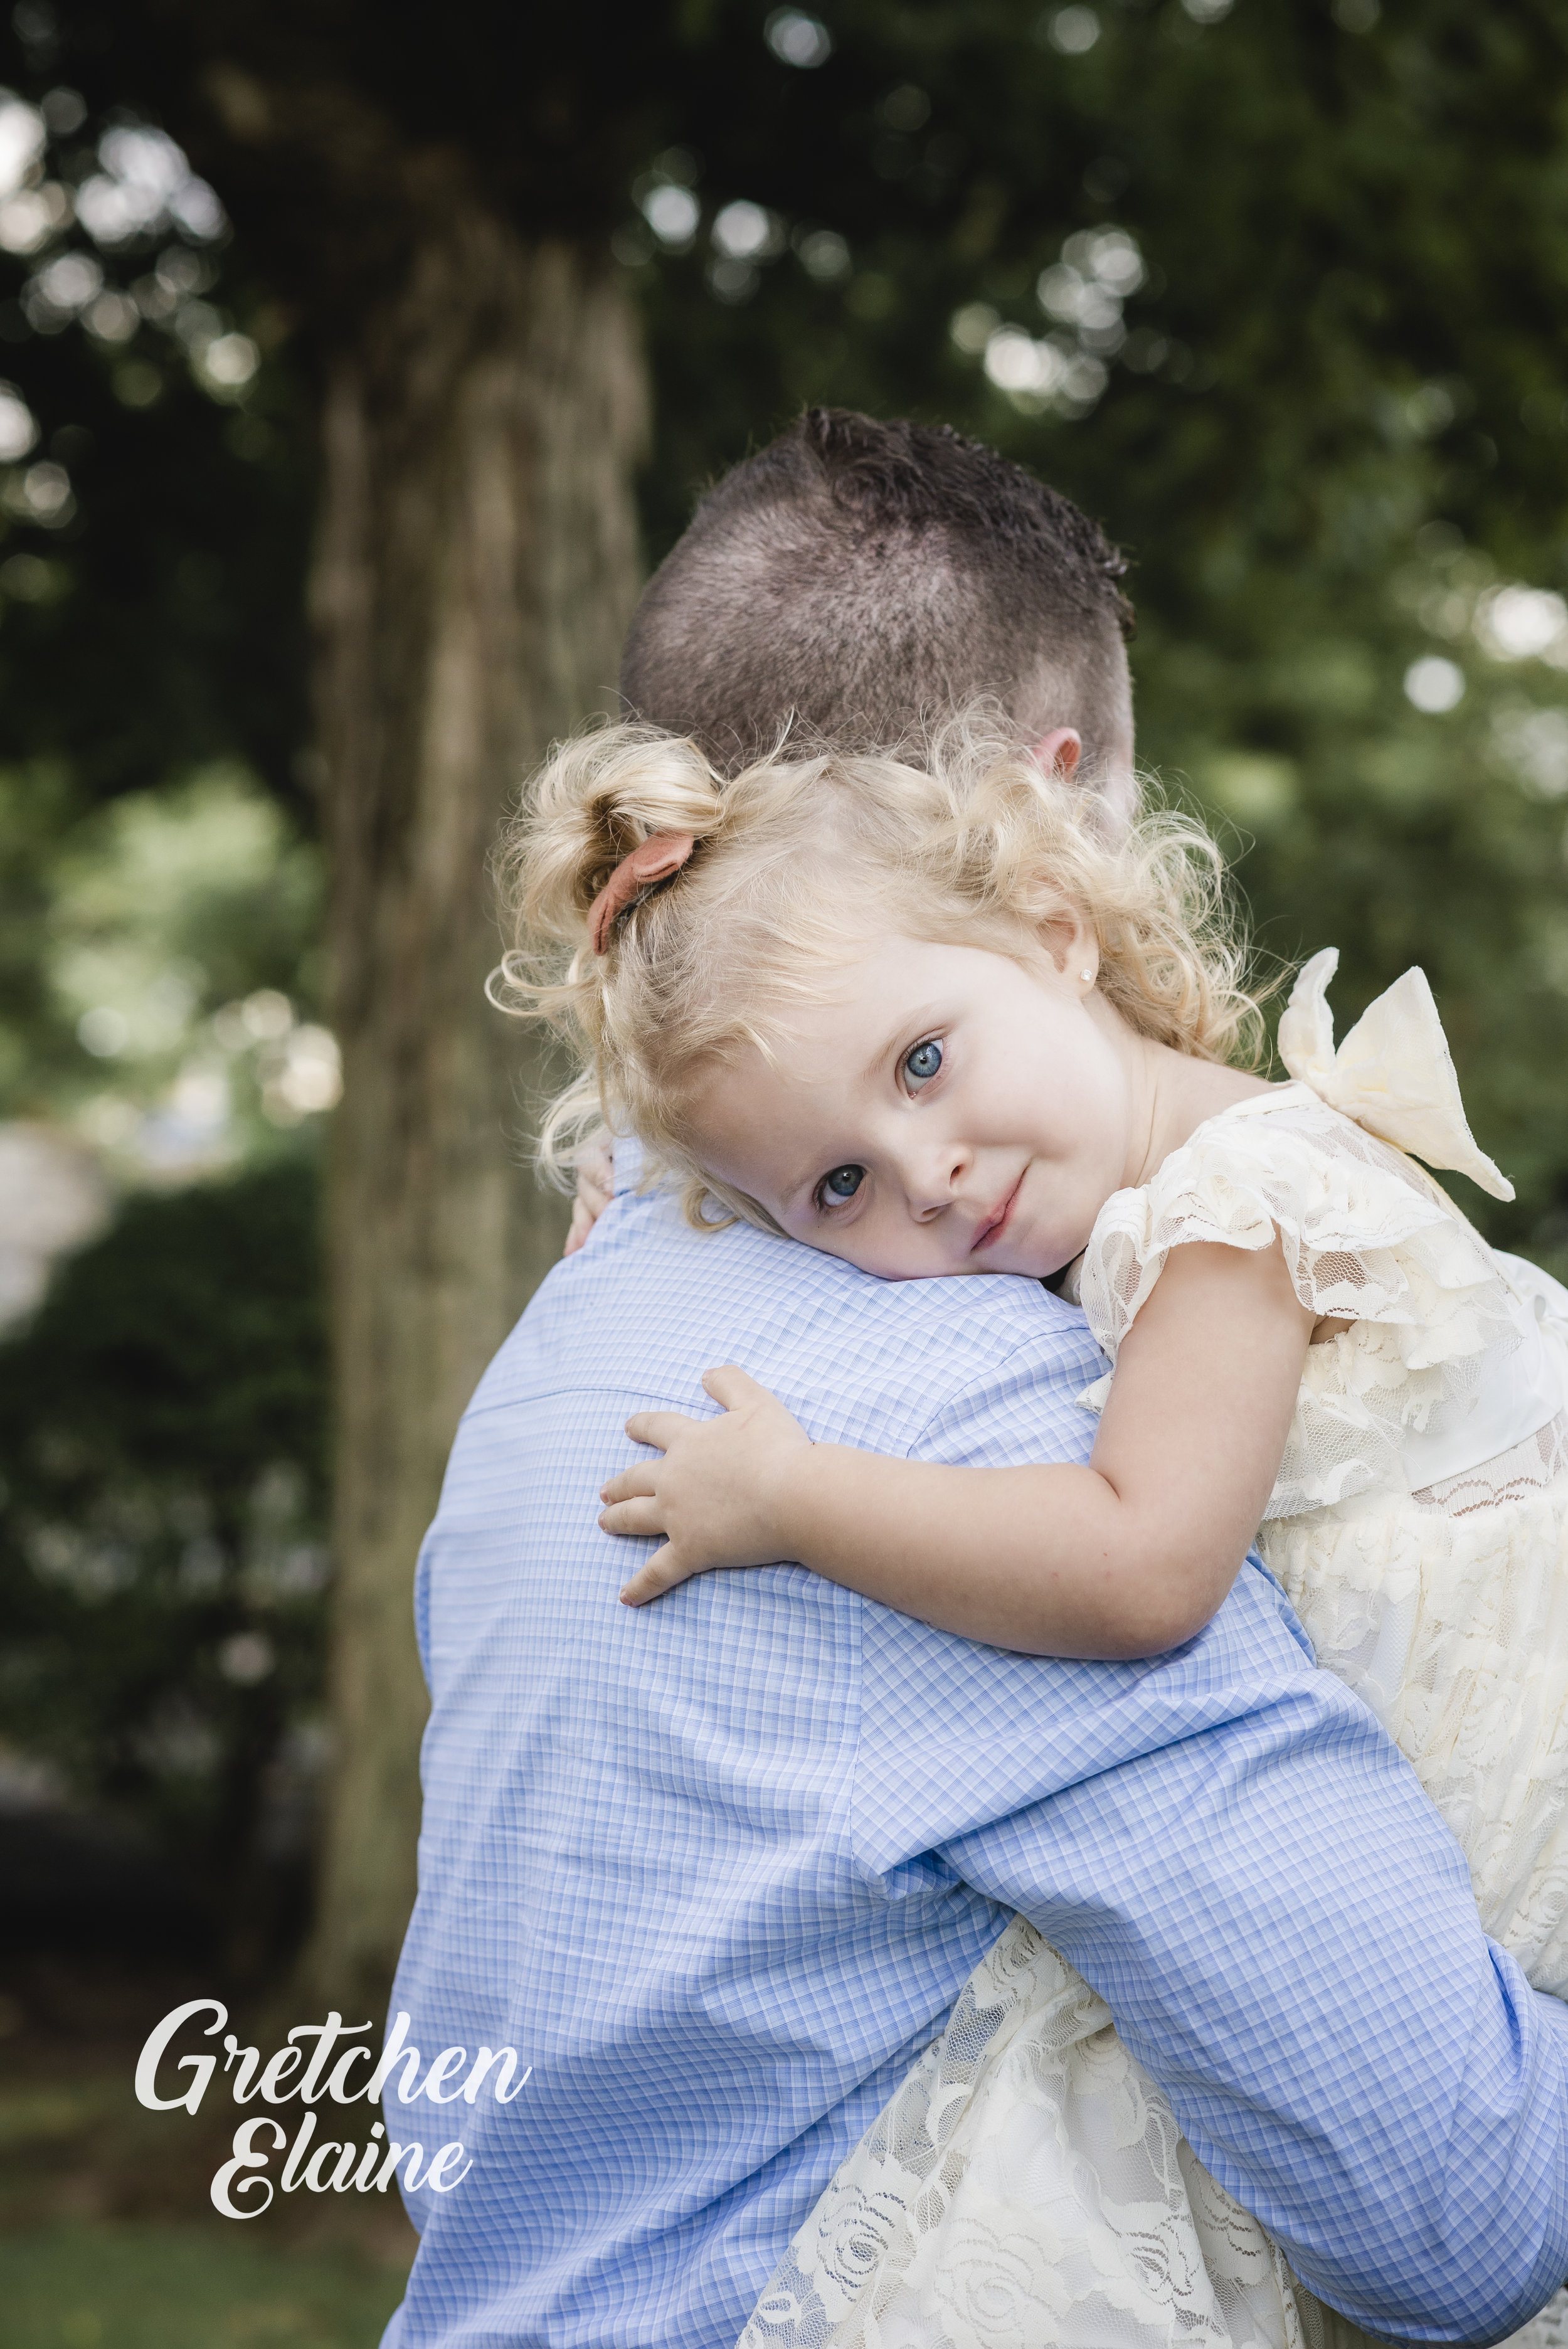 There Is No Bond Like A Dad And His Little Girl Gretchen Elaine Photography Daddy Me Sessions Wedding Portrait Photographer Lancaster Pa Gretchen Elaine Photography